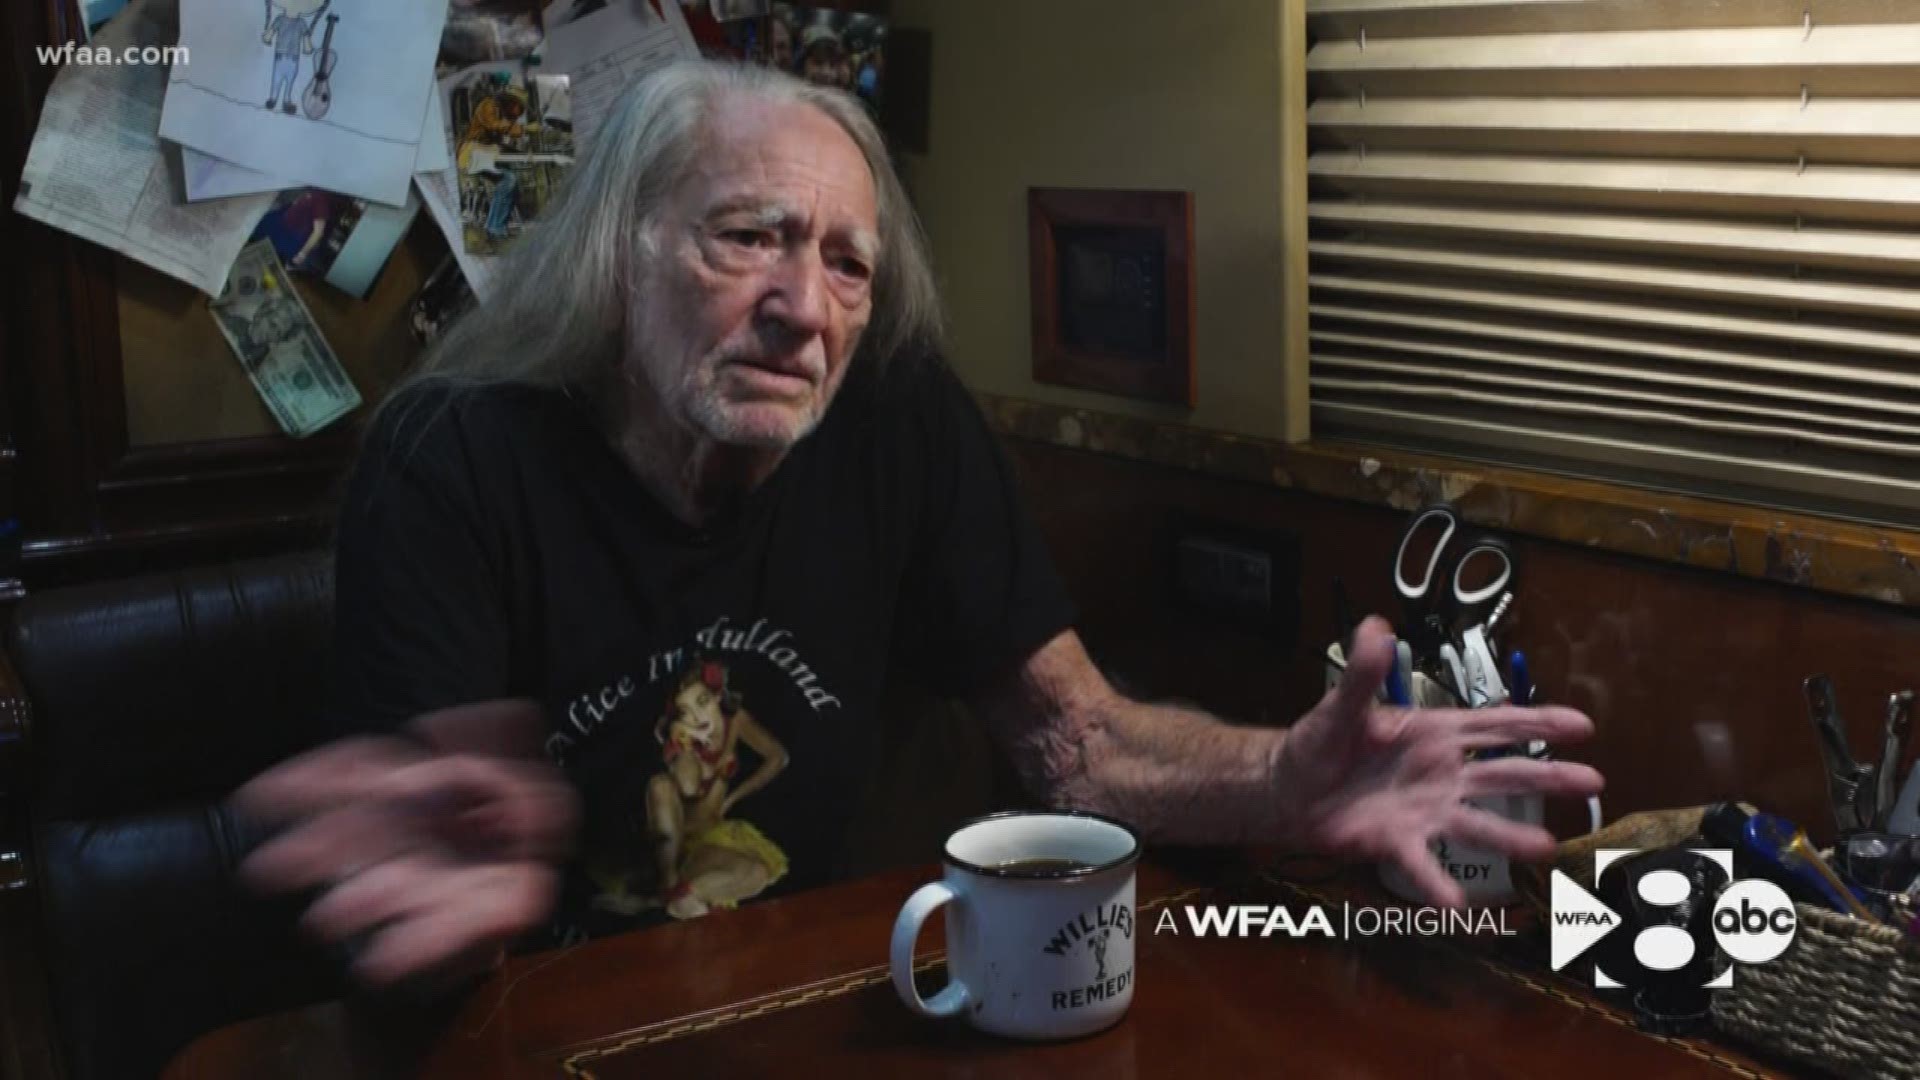 Country music legend Willie Nelson: 'We Texans are pretty adamant about where we come from'